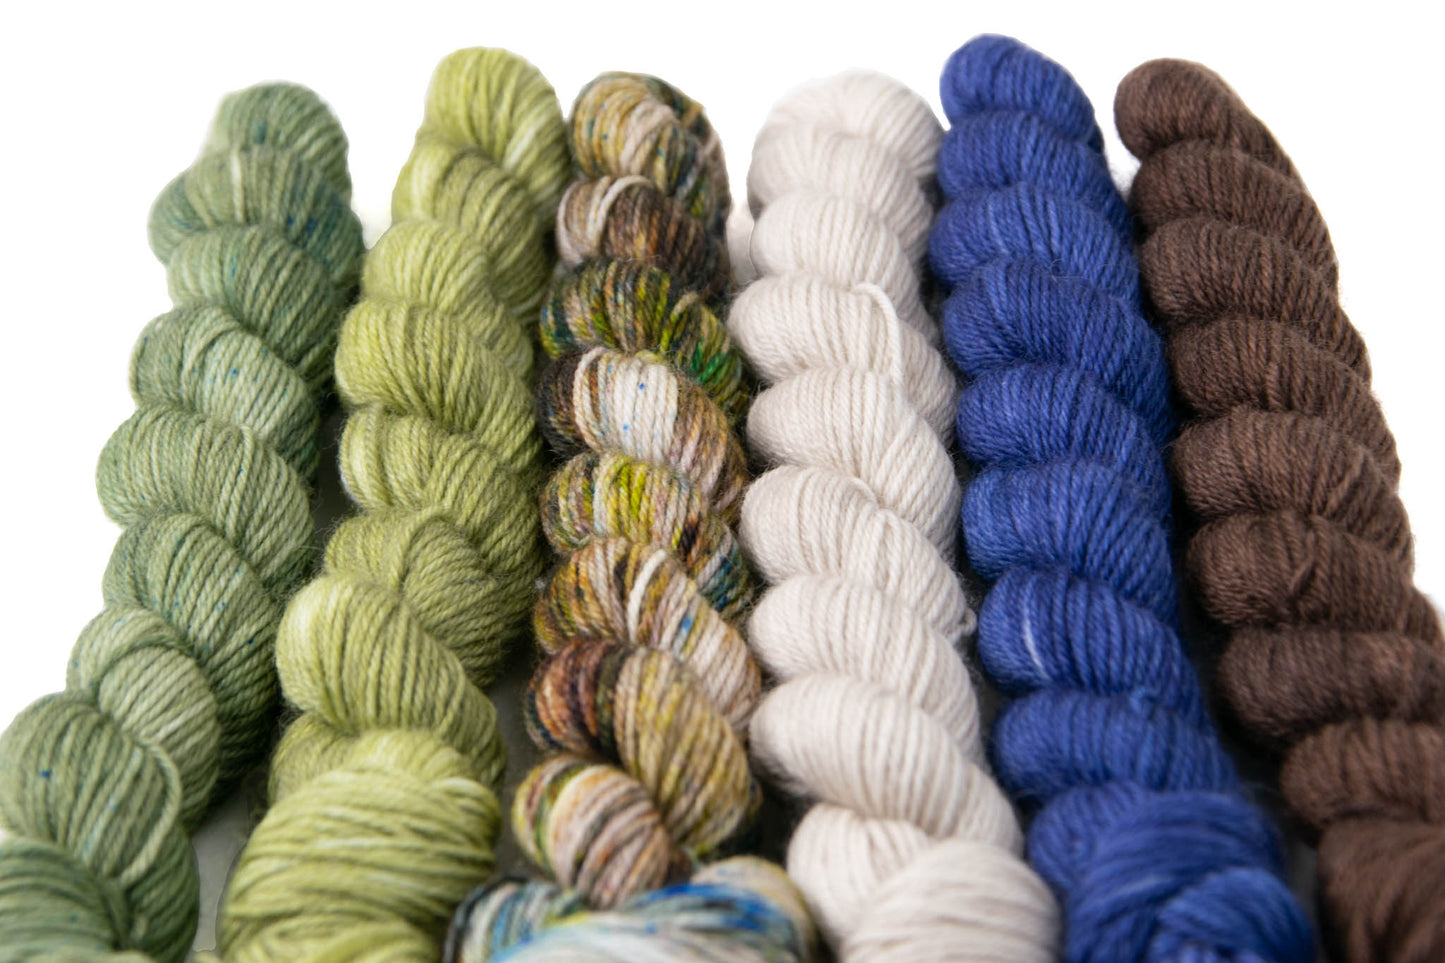 A mini skein of each of the colorway options for the Multistate kit.